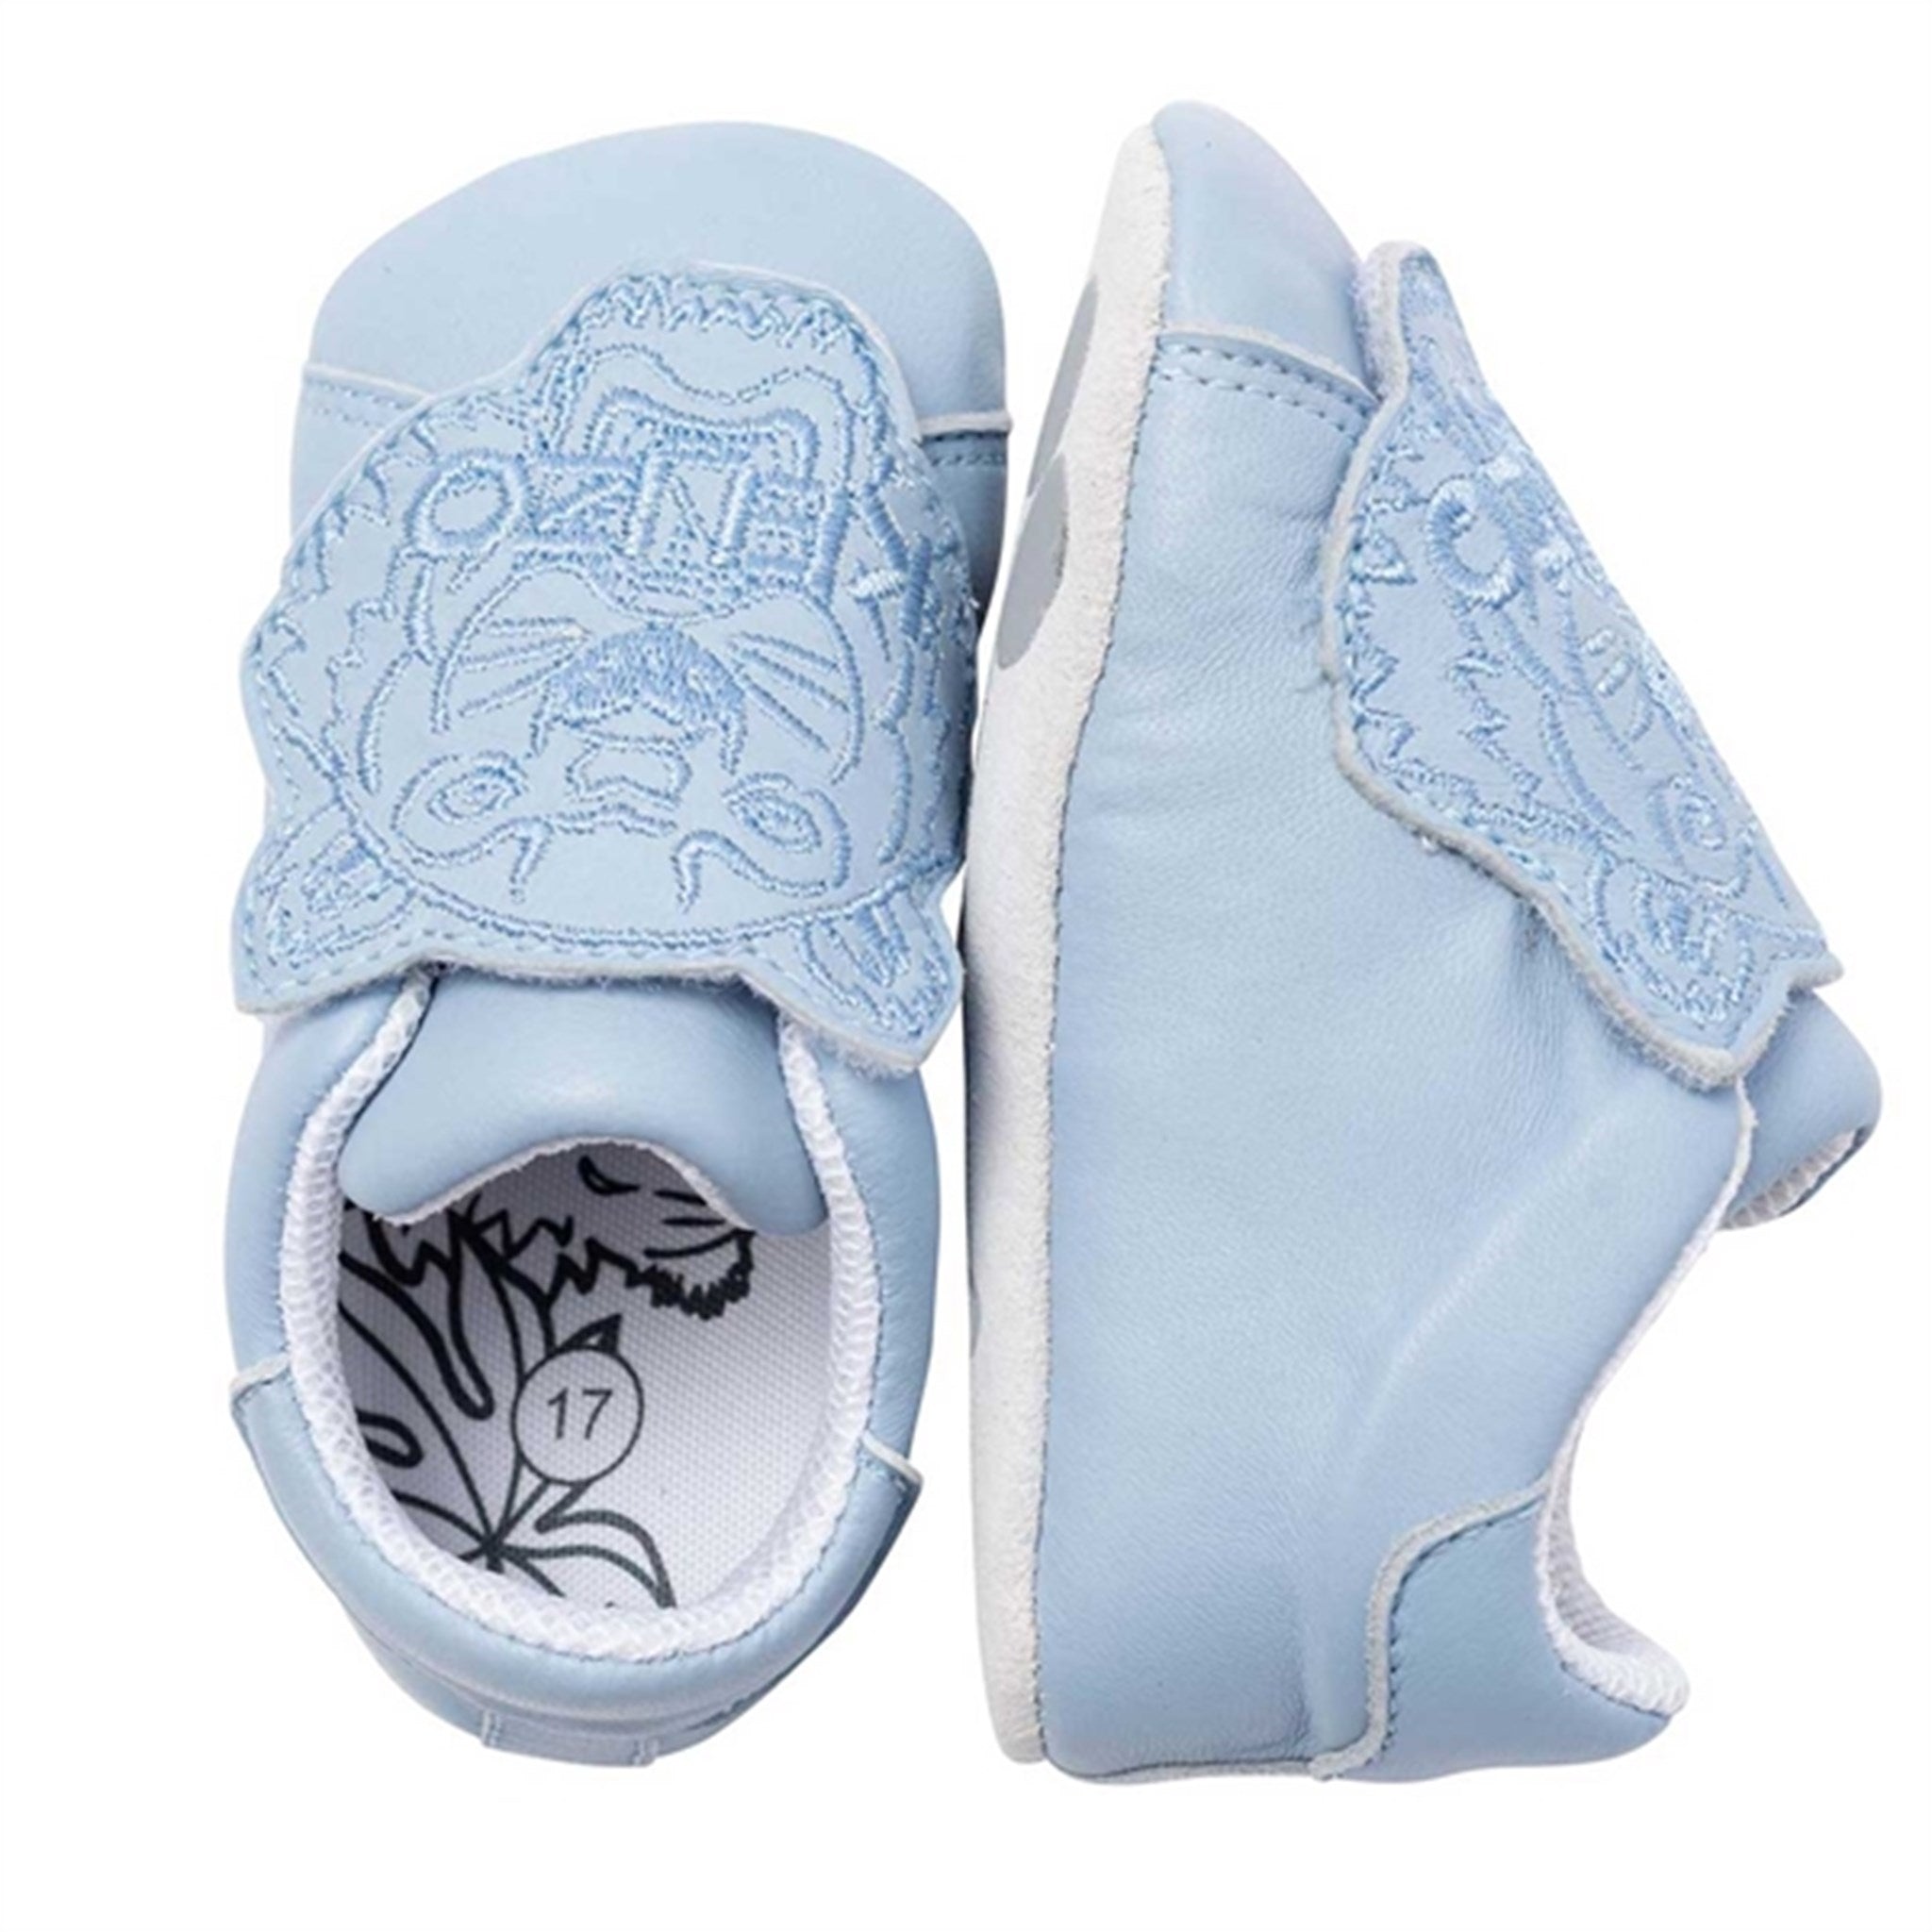 Kenzo Tiger Slippers Pale Blue 7